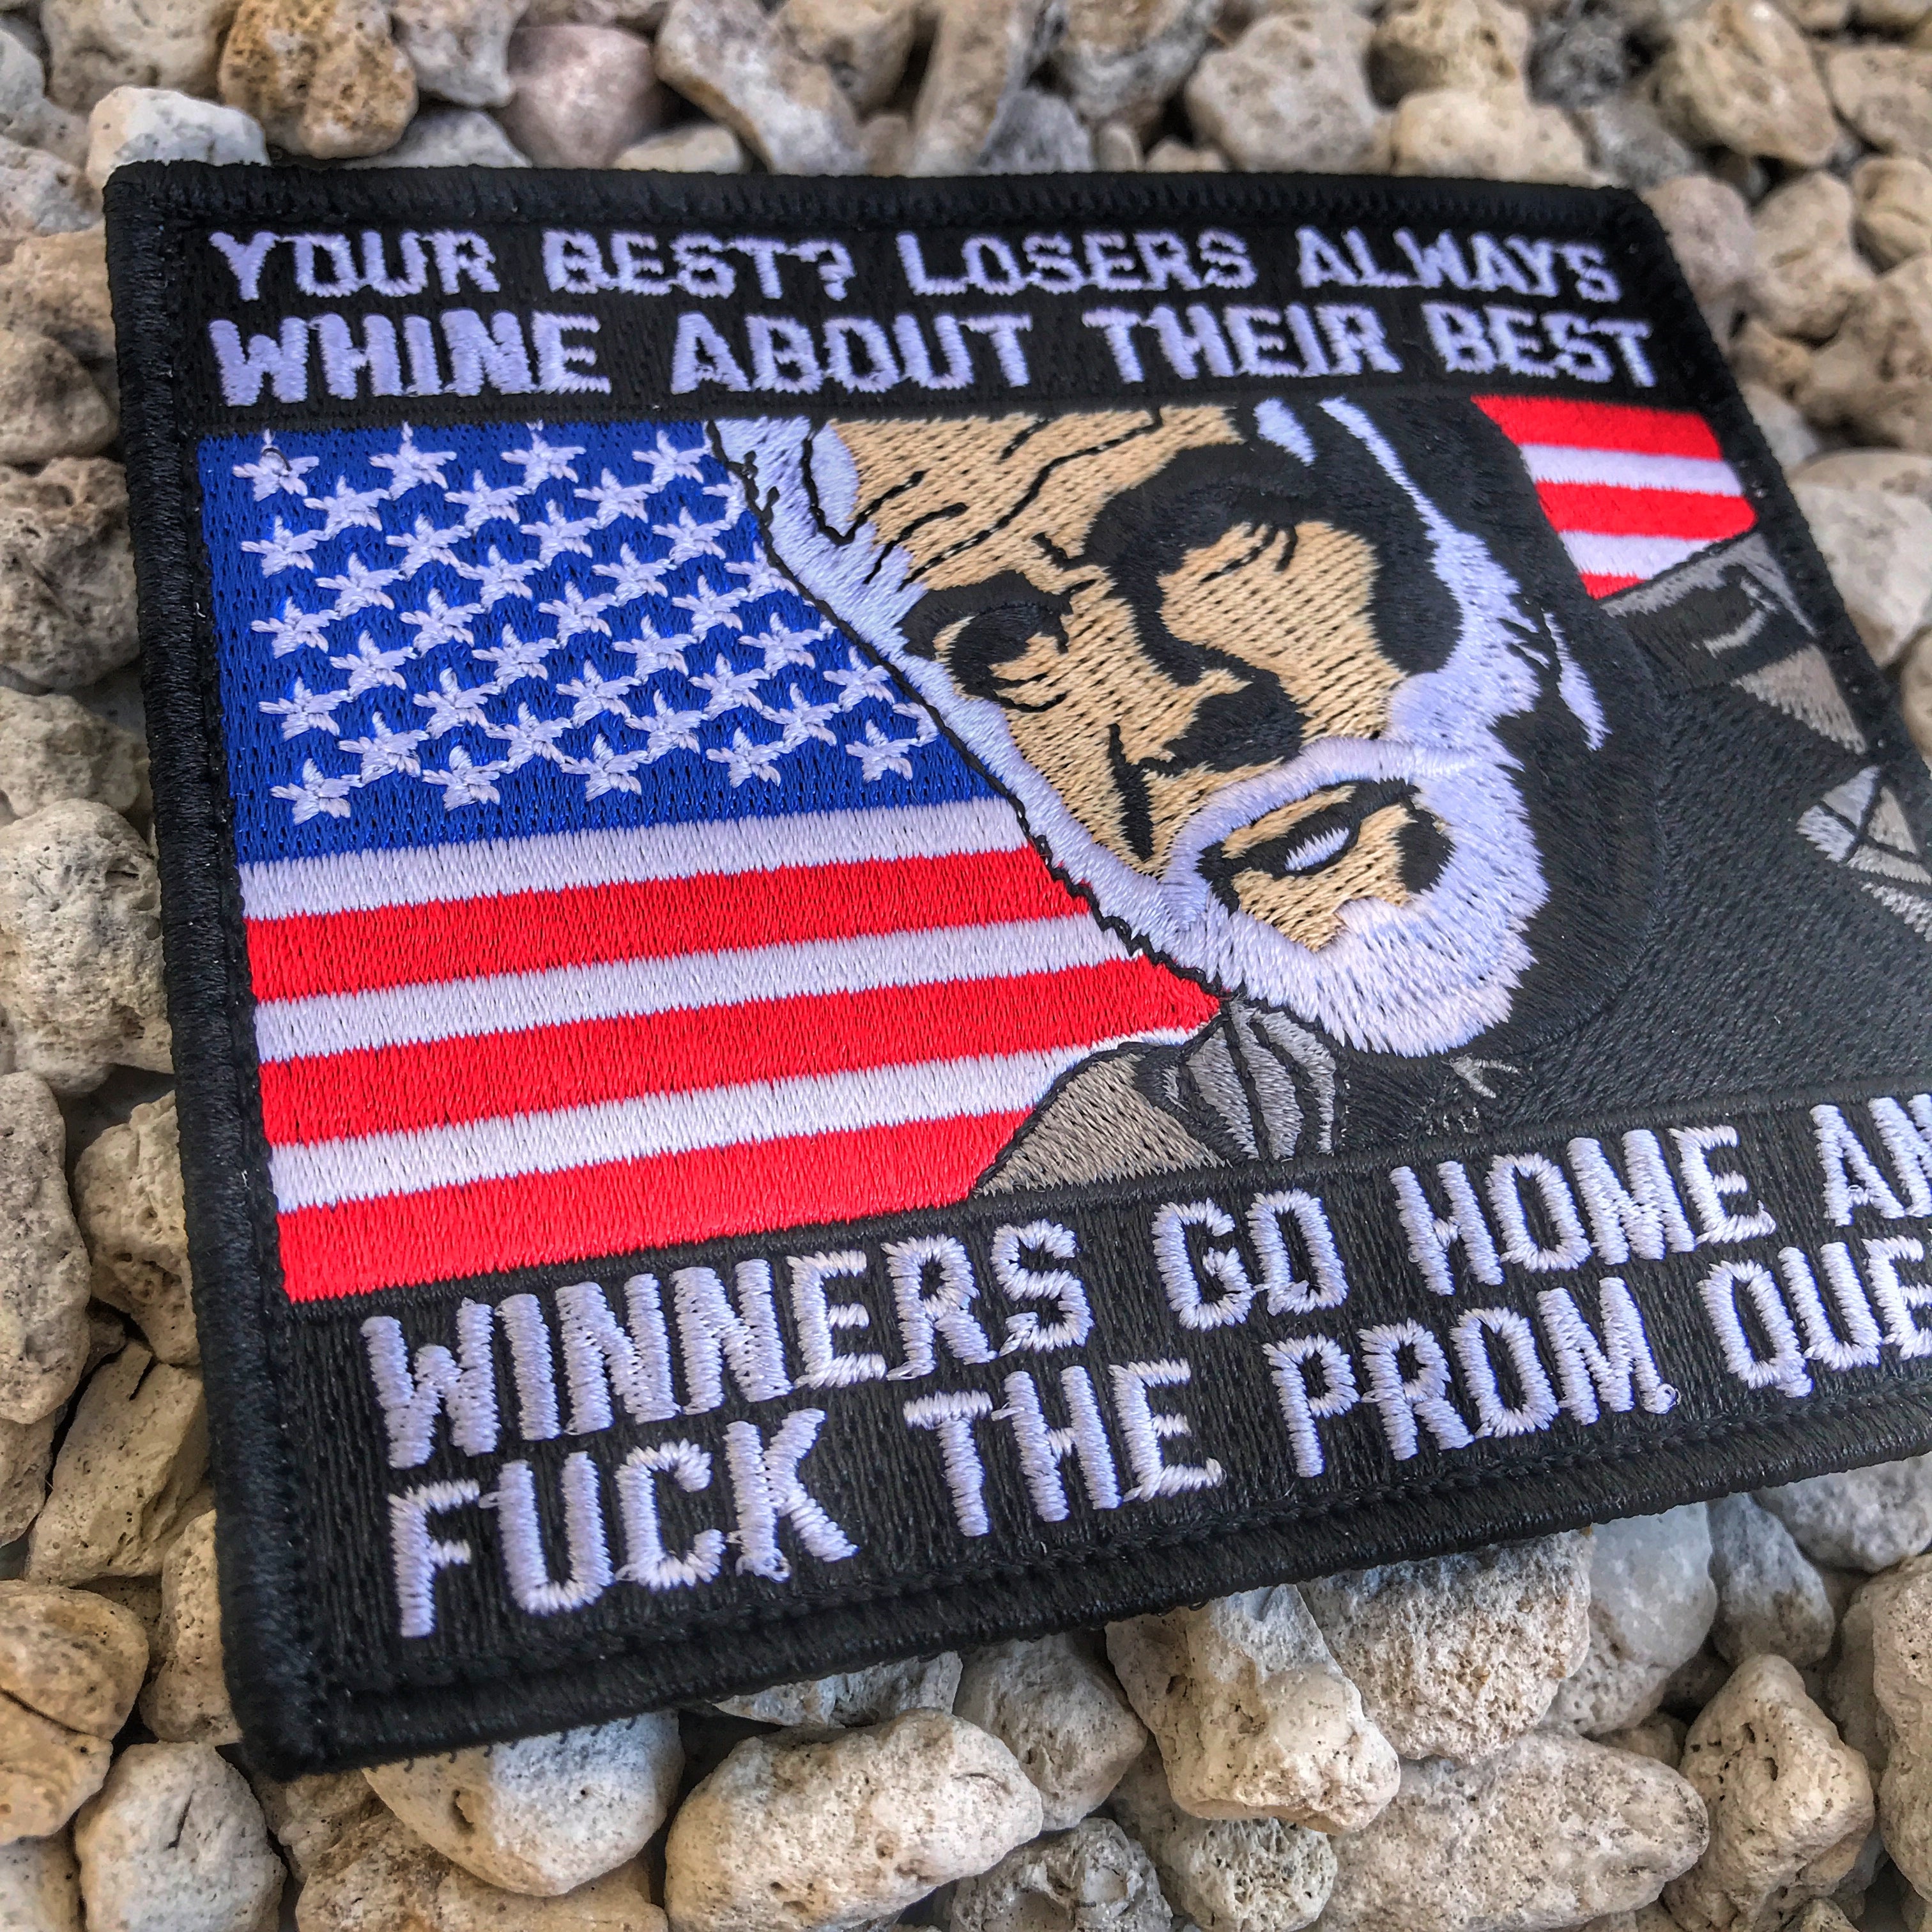 Red white and Blue Embroidered patch with a man’s head in the middle of American flag and text above and below that reads Losers always whine about their best winners go home and fuck the prom queen